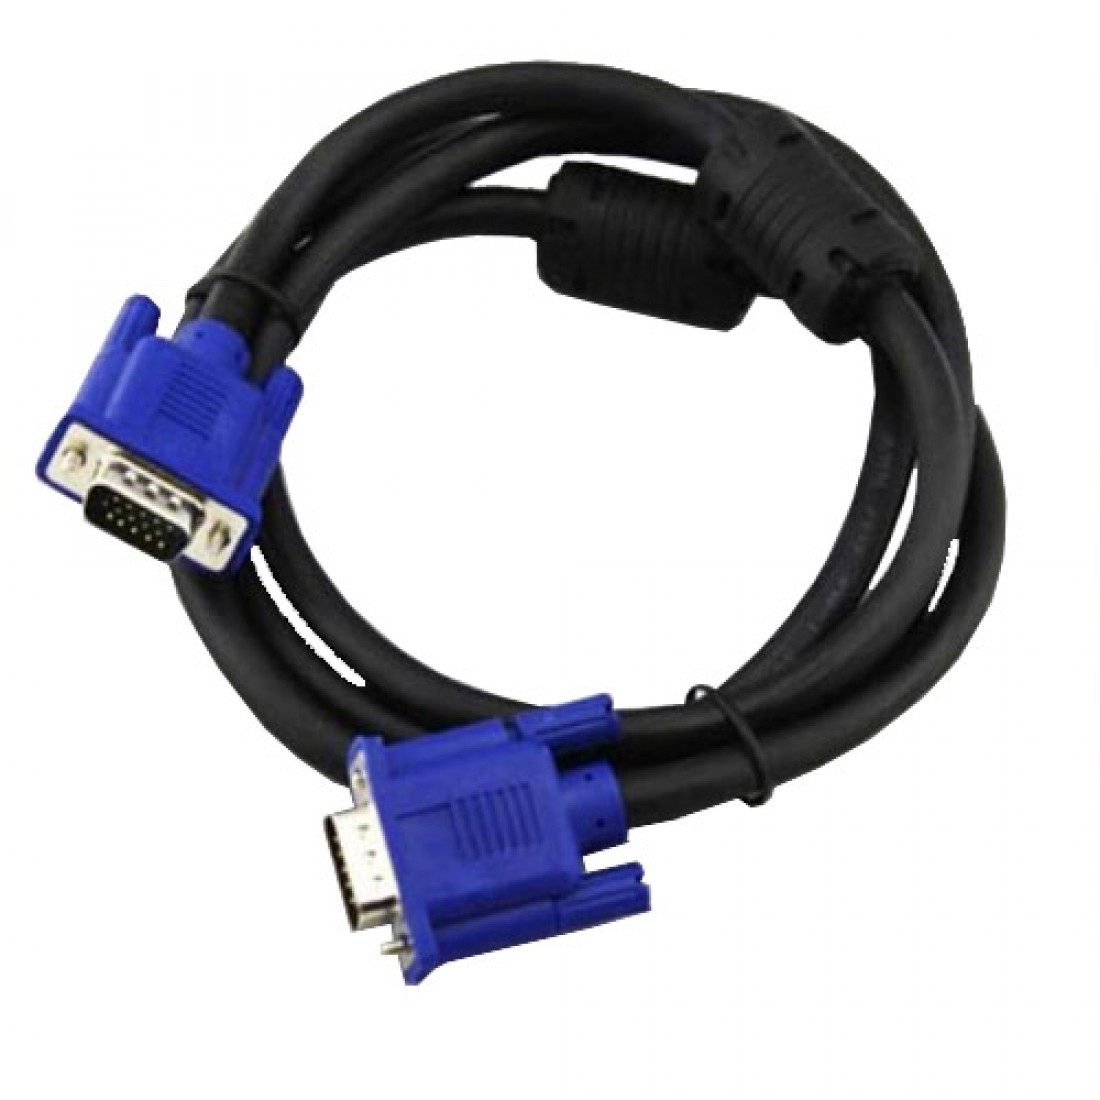  VGA CABLE3+4 WITH 2 FILTER 